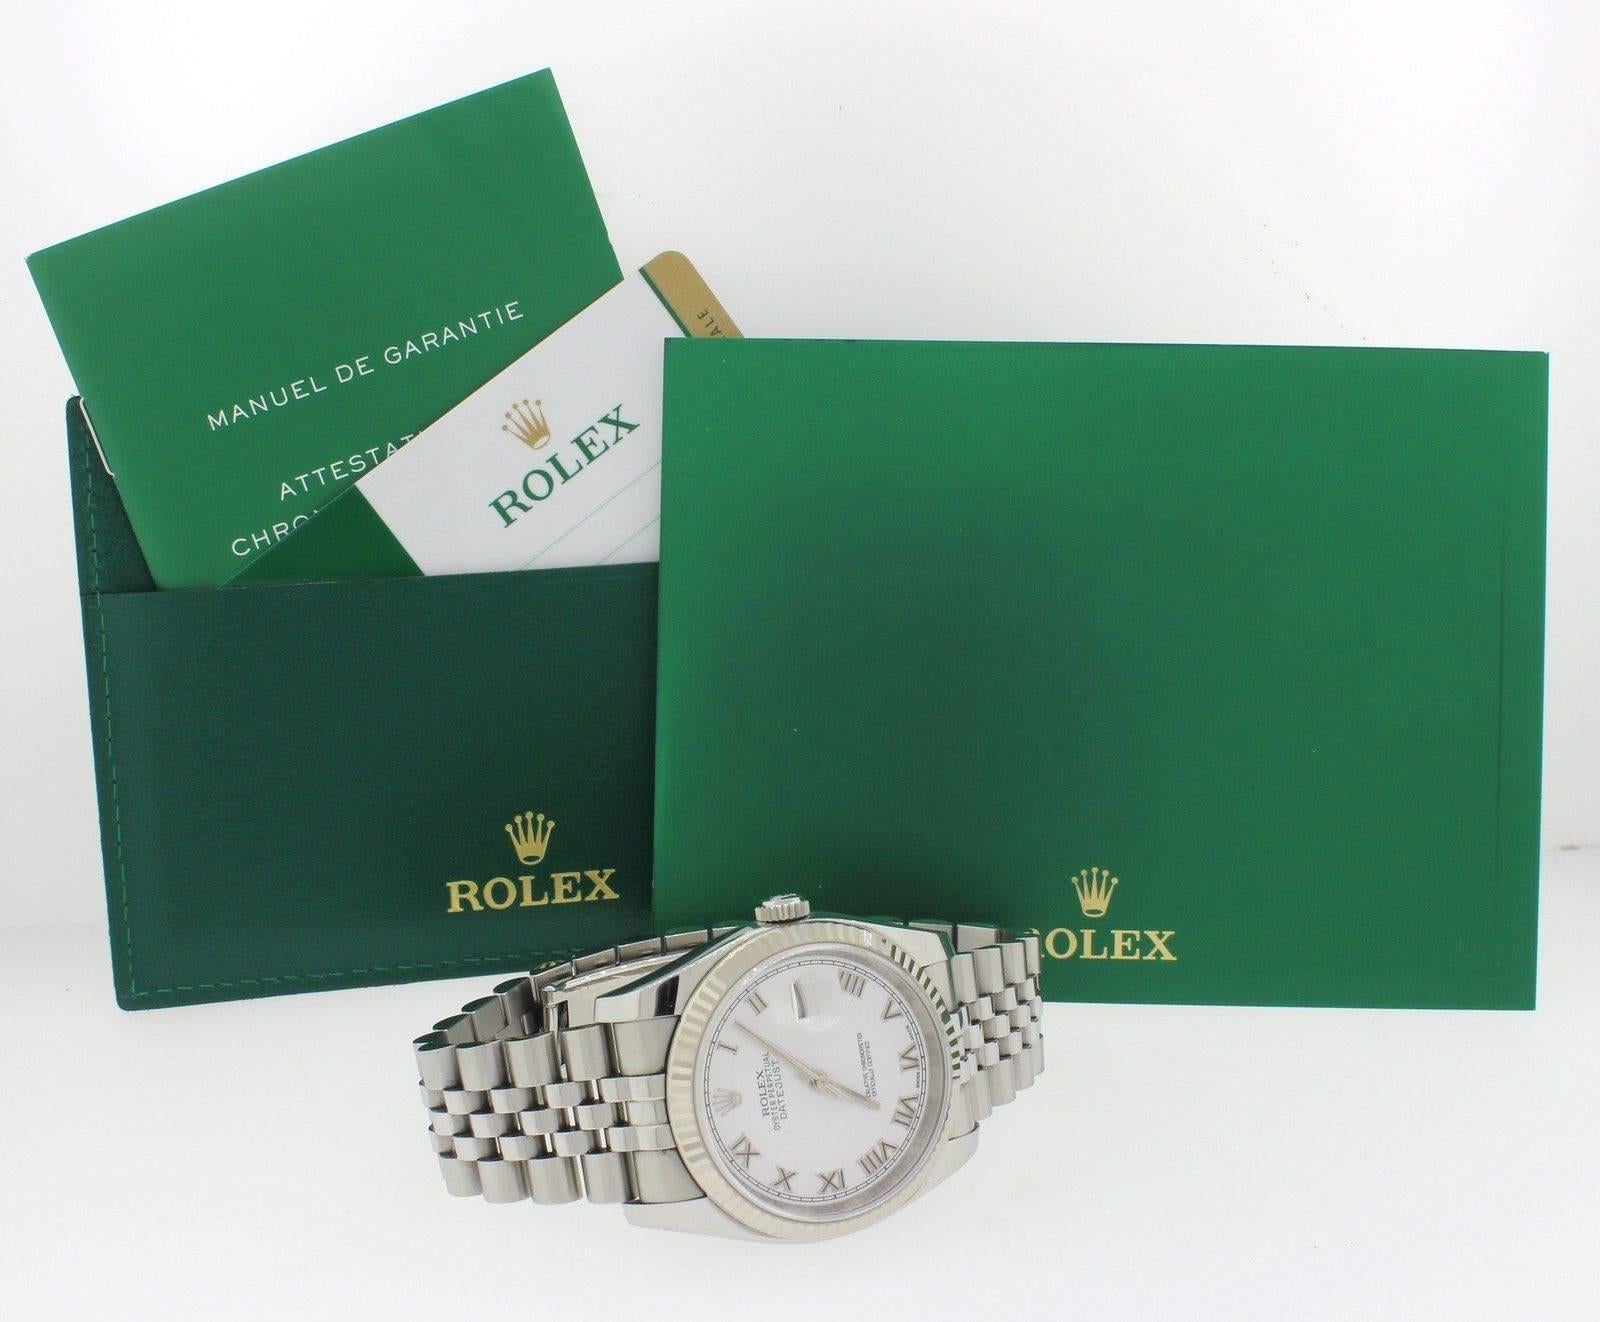 2015 Rolex DateJust 18k White Gold Stainless Steel White Roman 36mm Jubilee 116234 Watch. Comes complete with all original box, papers, watch tags and booklets.

Active Rolex Warranty

Brand	Rolex (Guaranteed Authentic)
Model